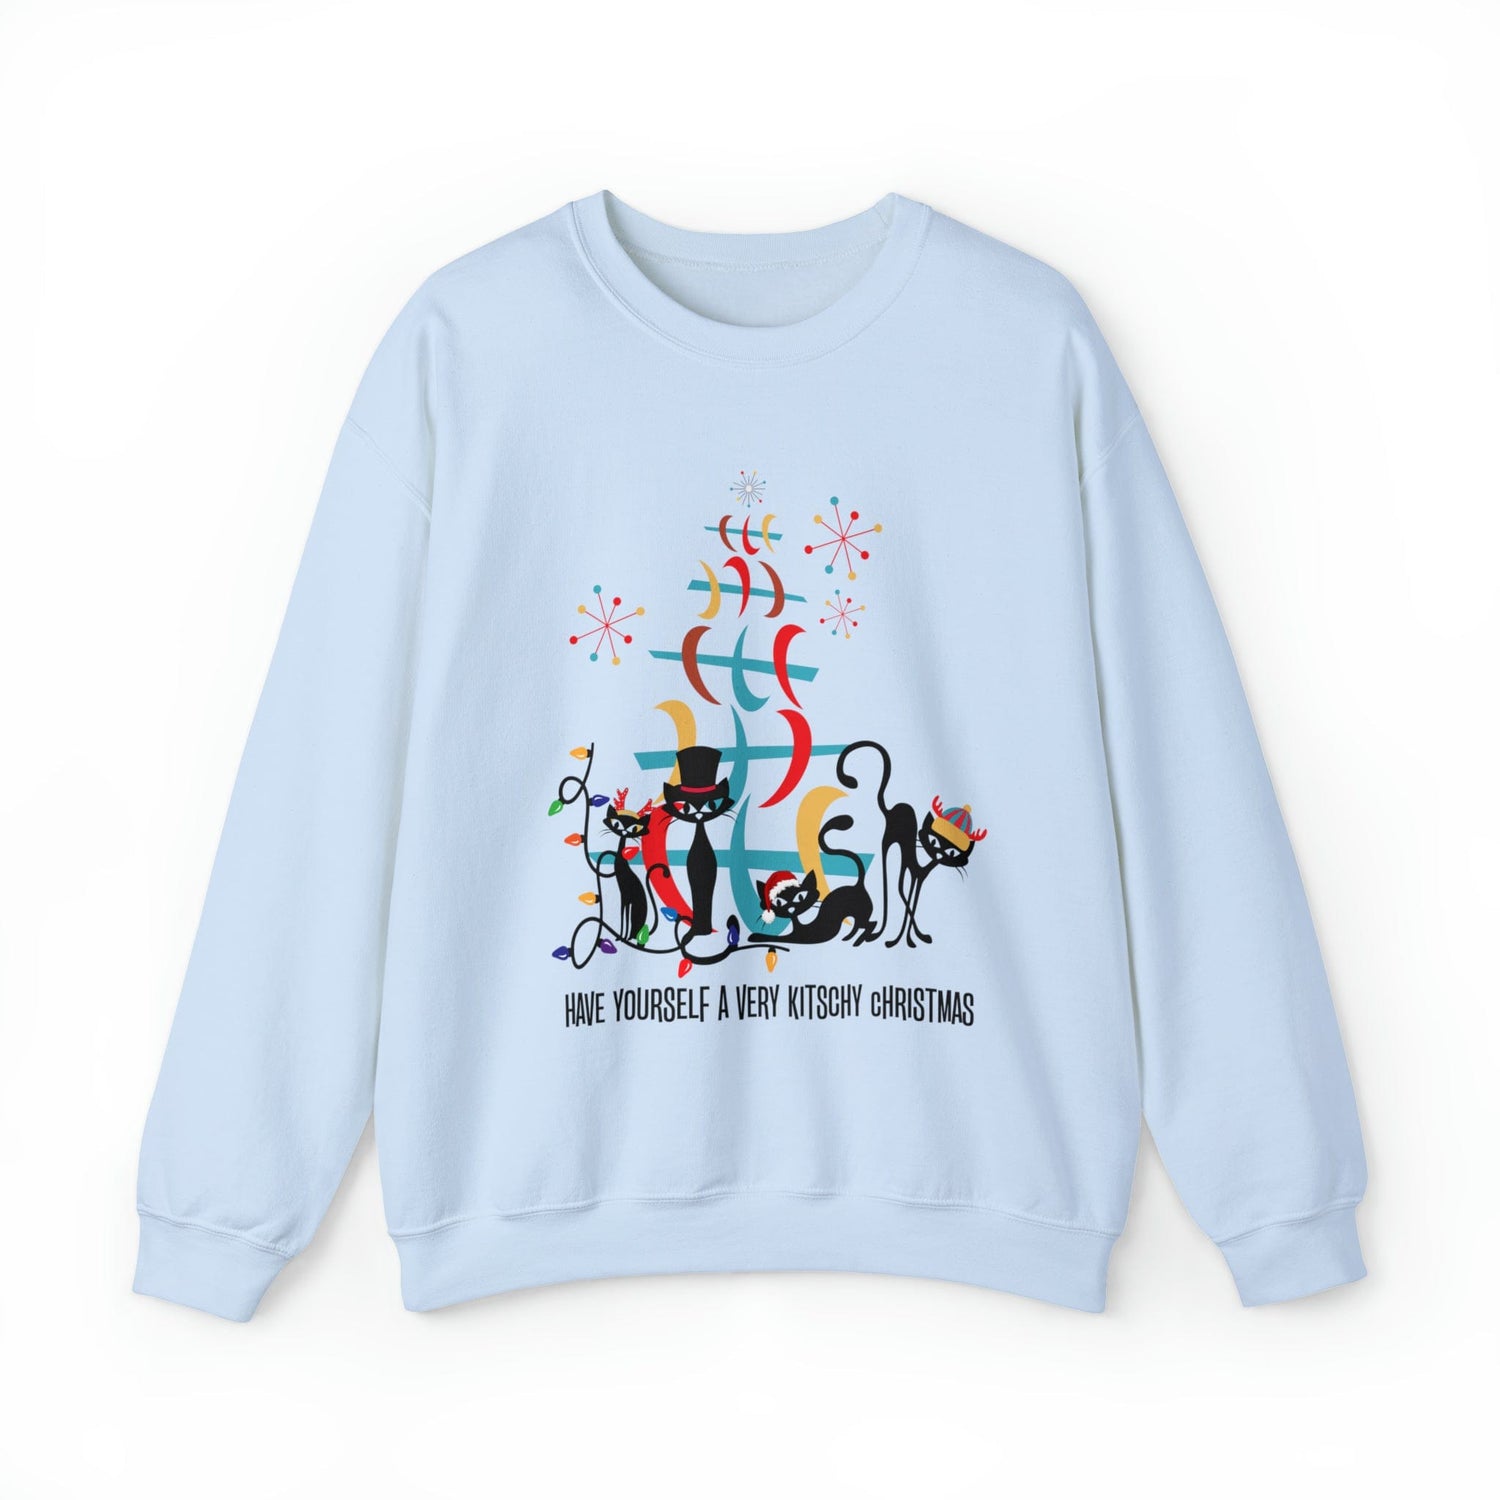 Atomic Cat Christmas Sweater, Have Yourself A Very Kitschy Christmas Cozy Loose Fit, Sweatshirt Sweatshirt 2XL / Light Blue